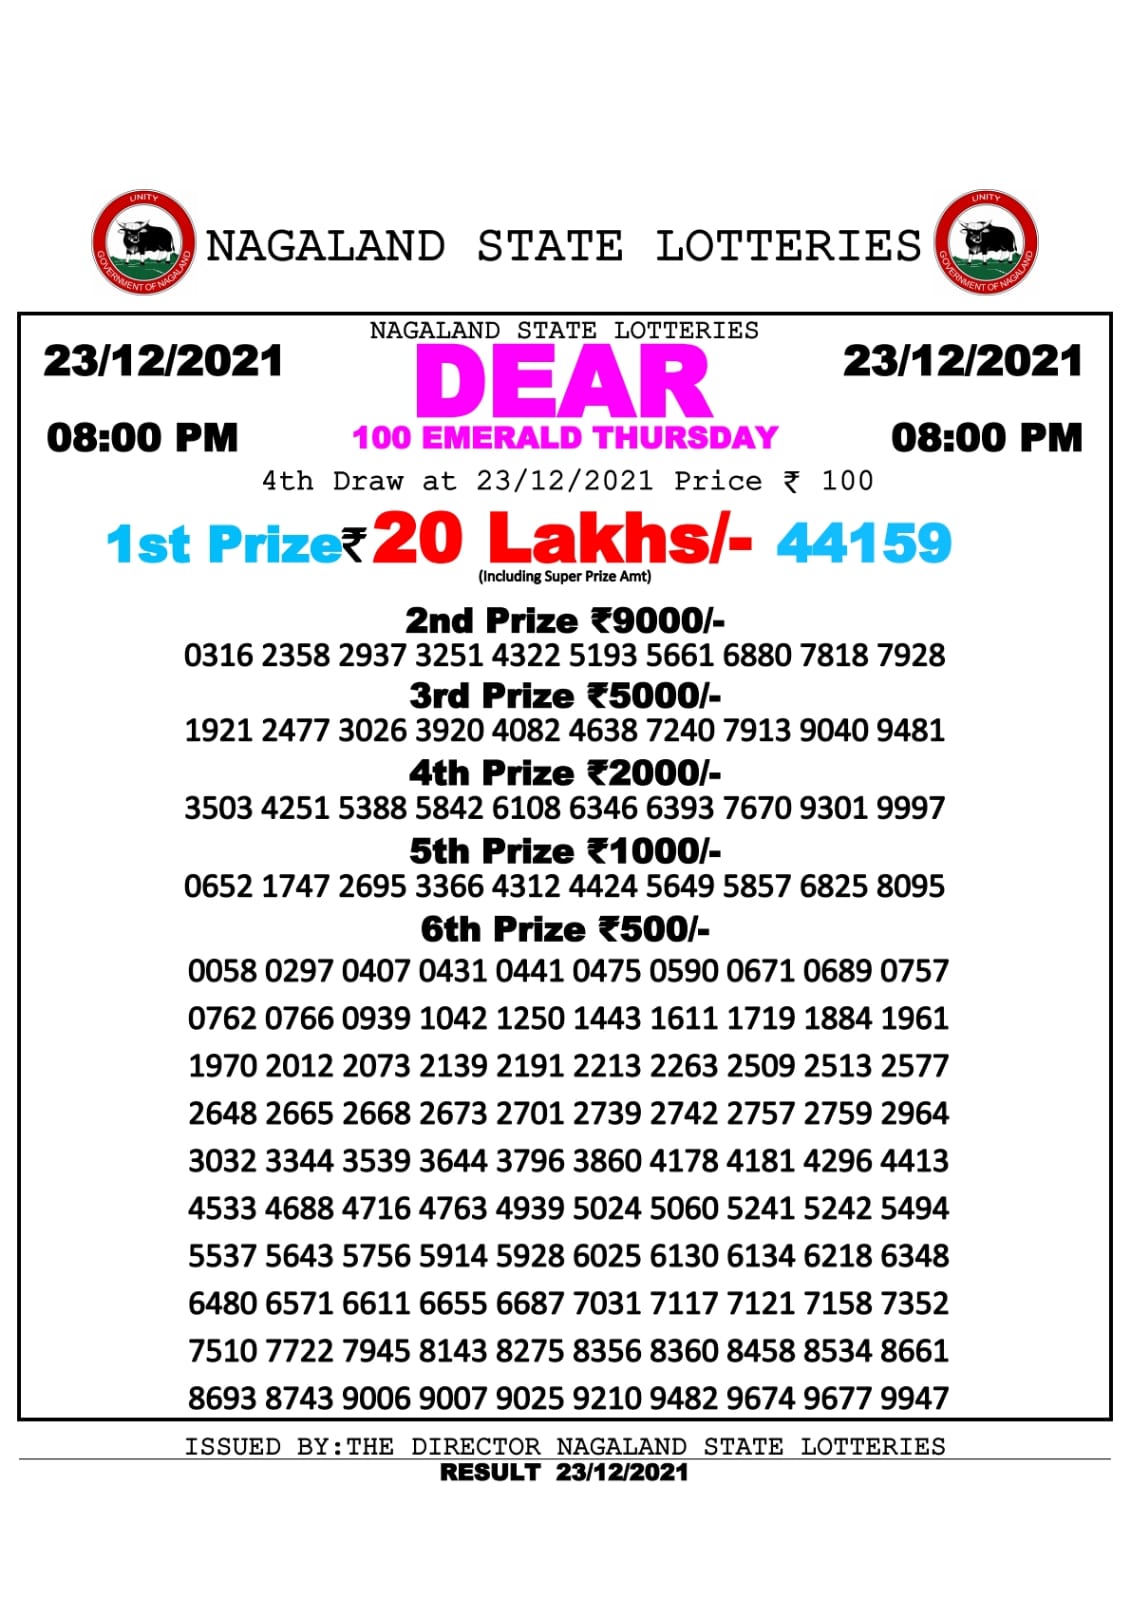 NAGALLAND STATE DEAR 100 WEEKLY LOTTERY 8 pm 23.12.2021